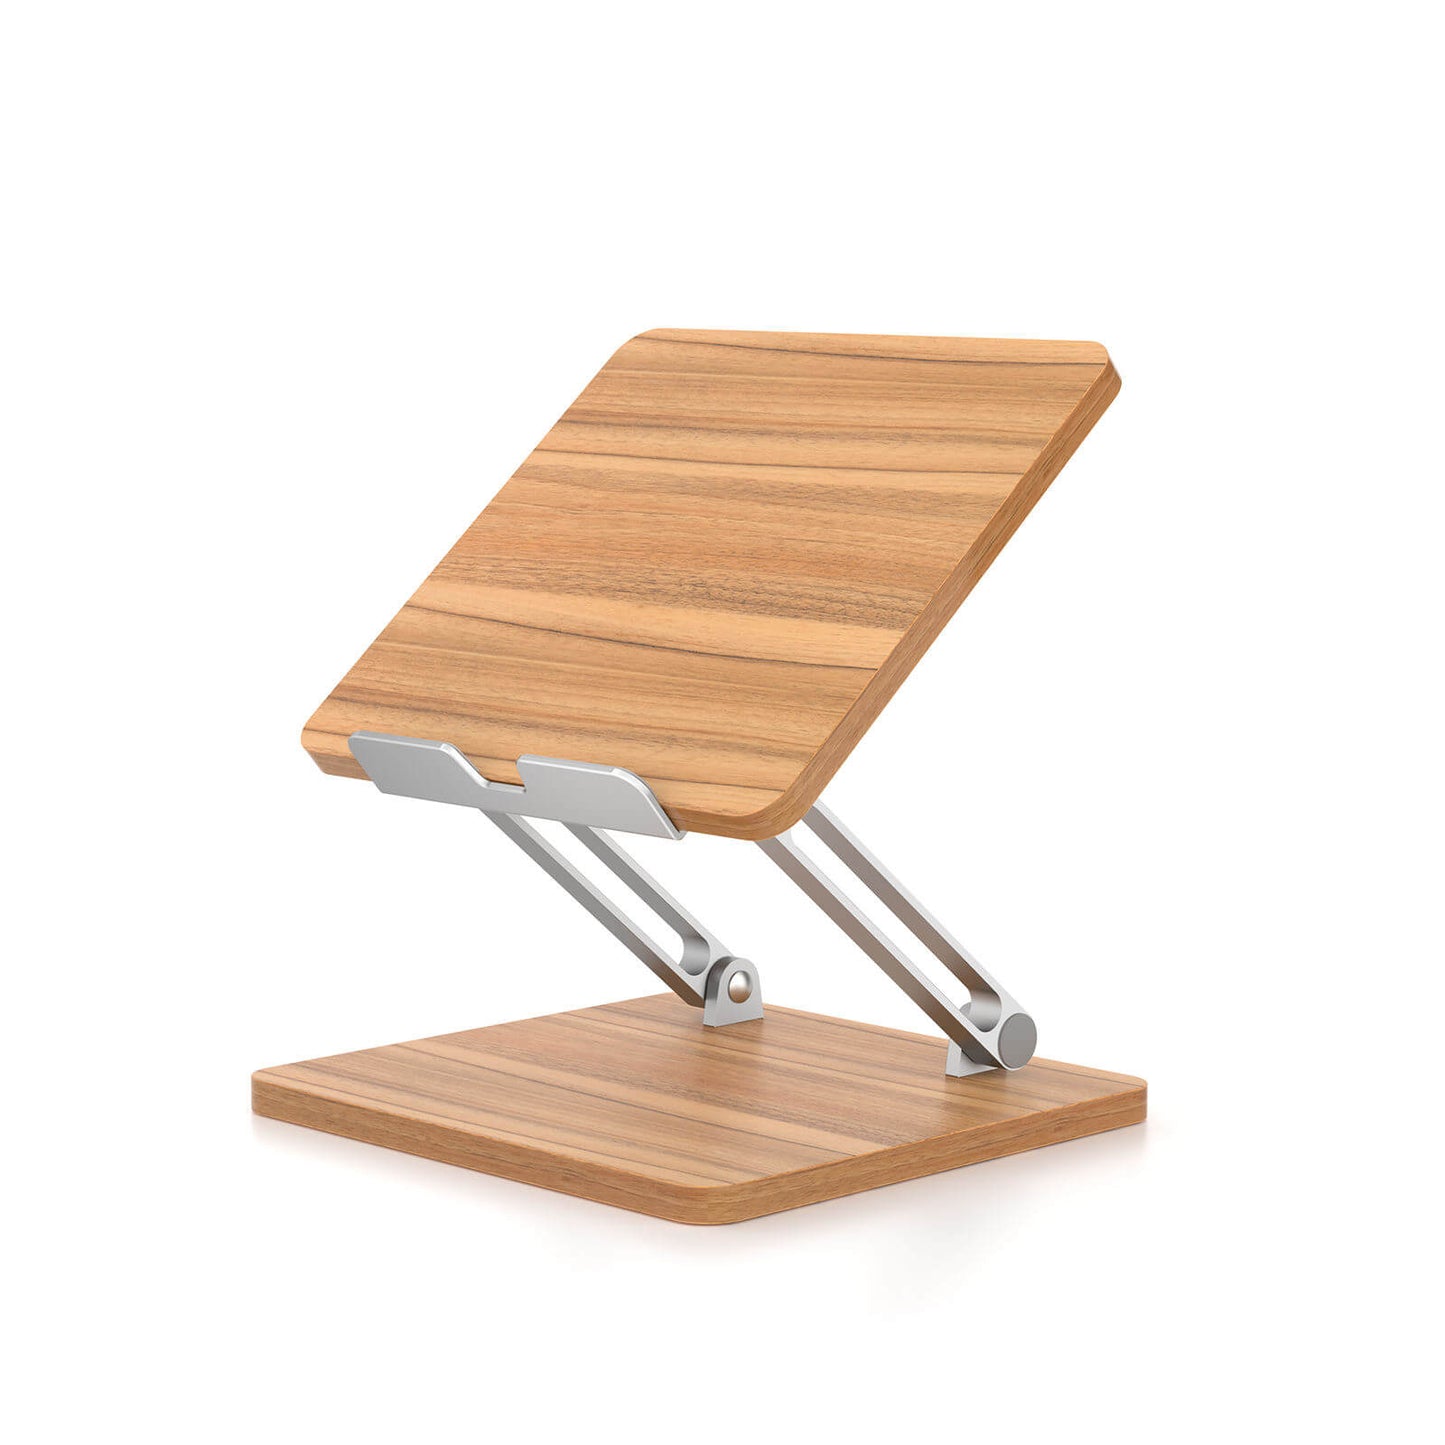 Wooden Aluminum Adjustable Height Tablet Mobile Phone Stand Reading Racks for 7 - 13" Tablet